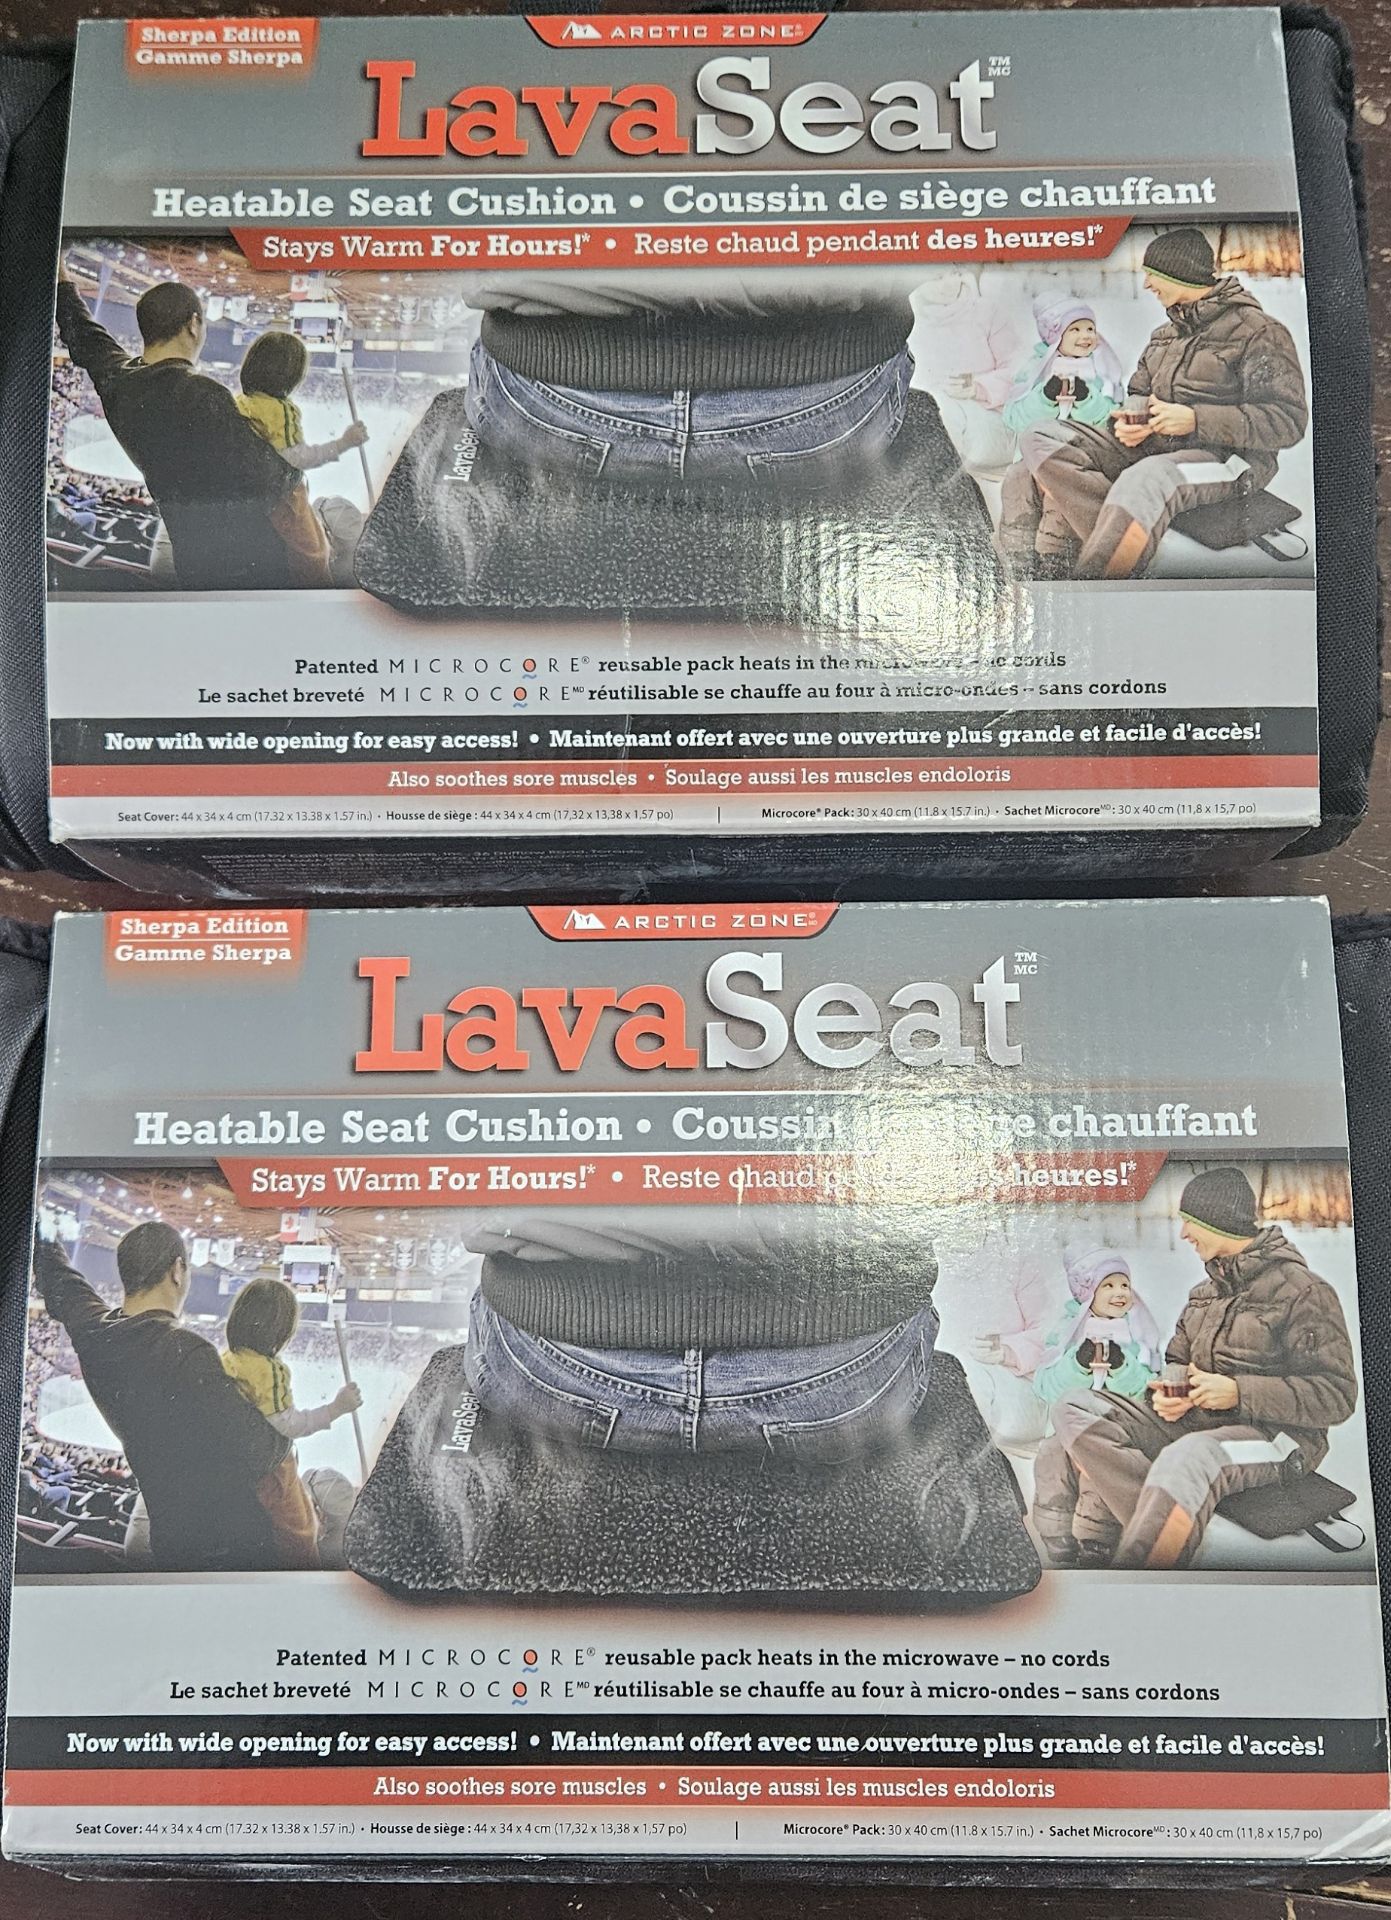 2 Lava Seats - Heatable Seat Cushions w/ Reusable Pack (Heat Up In Microwave)